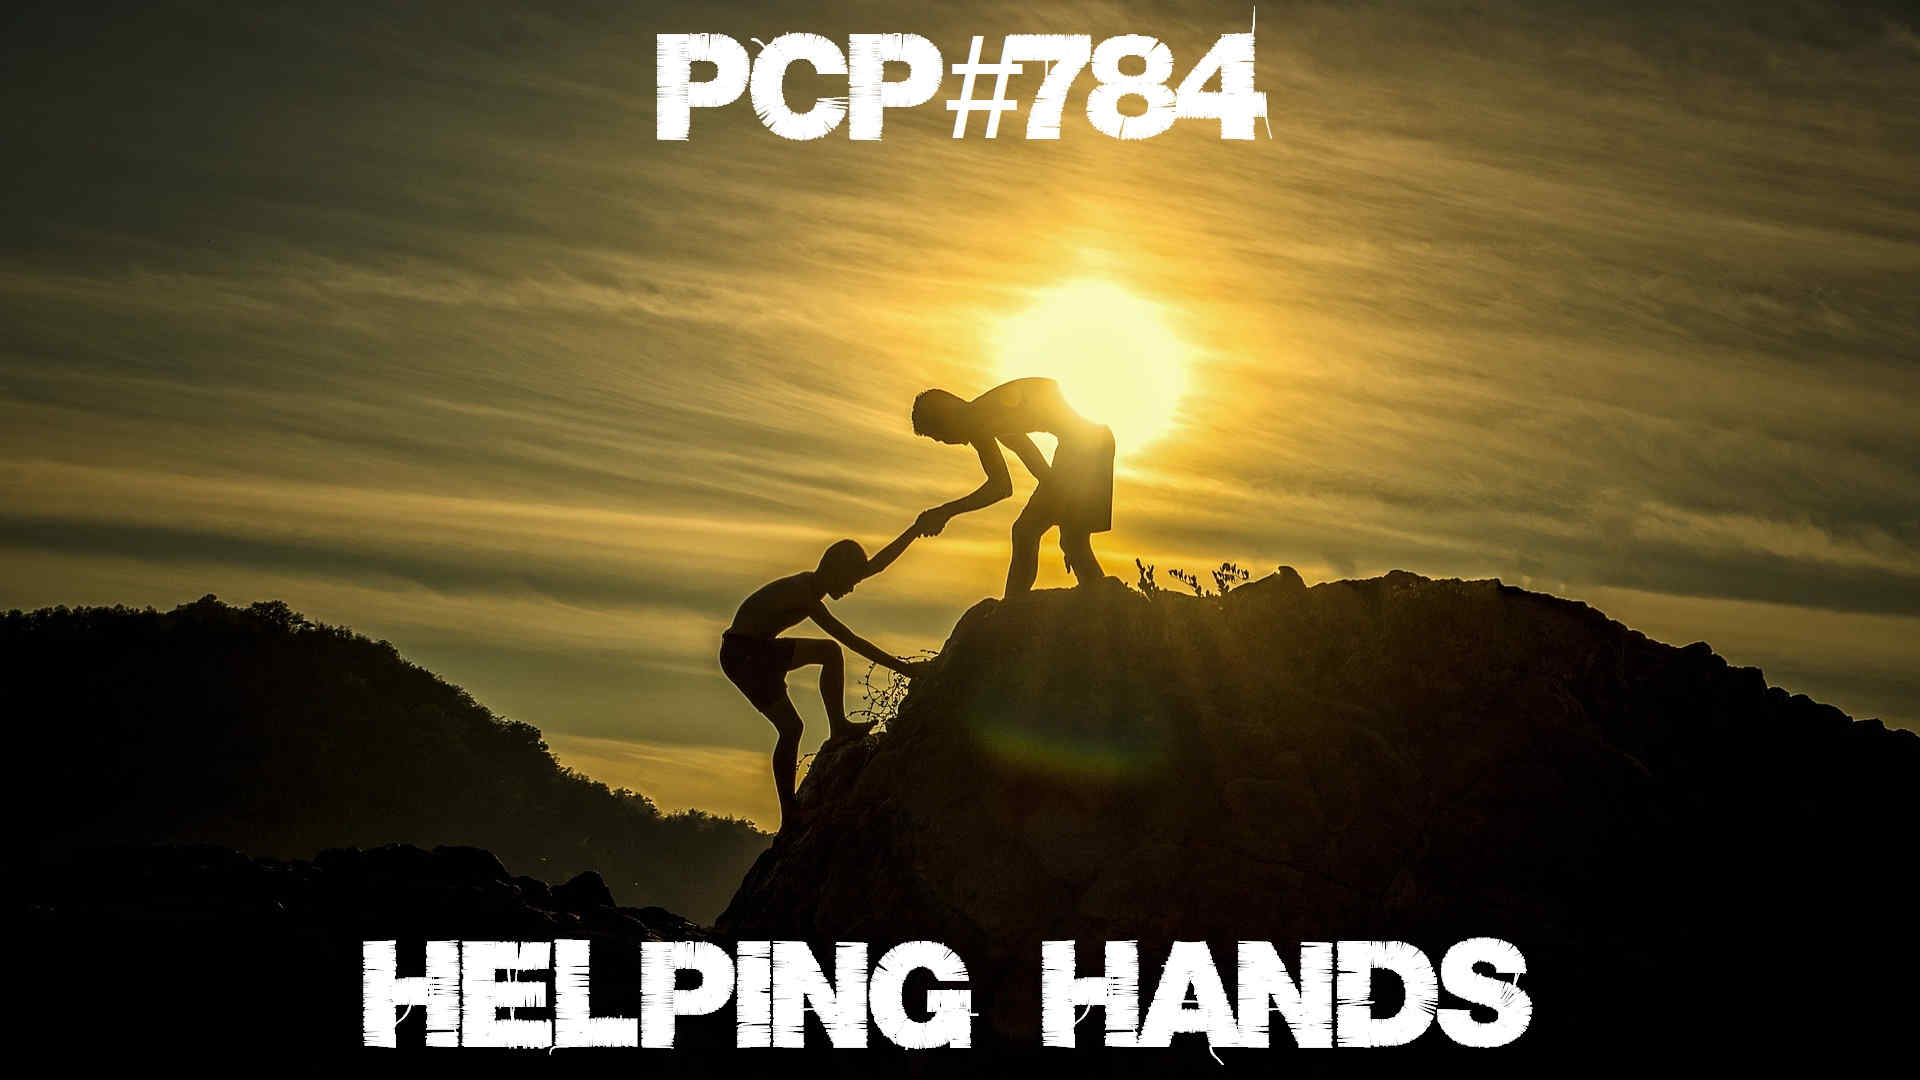 PCP#784... Helping Hands...